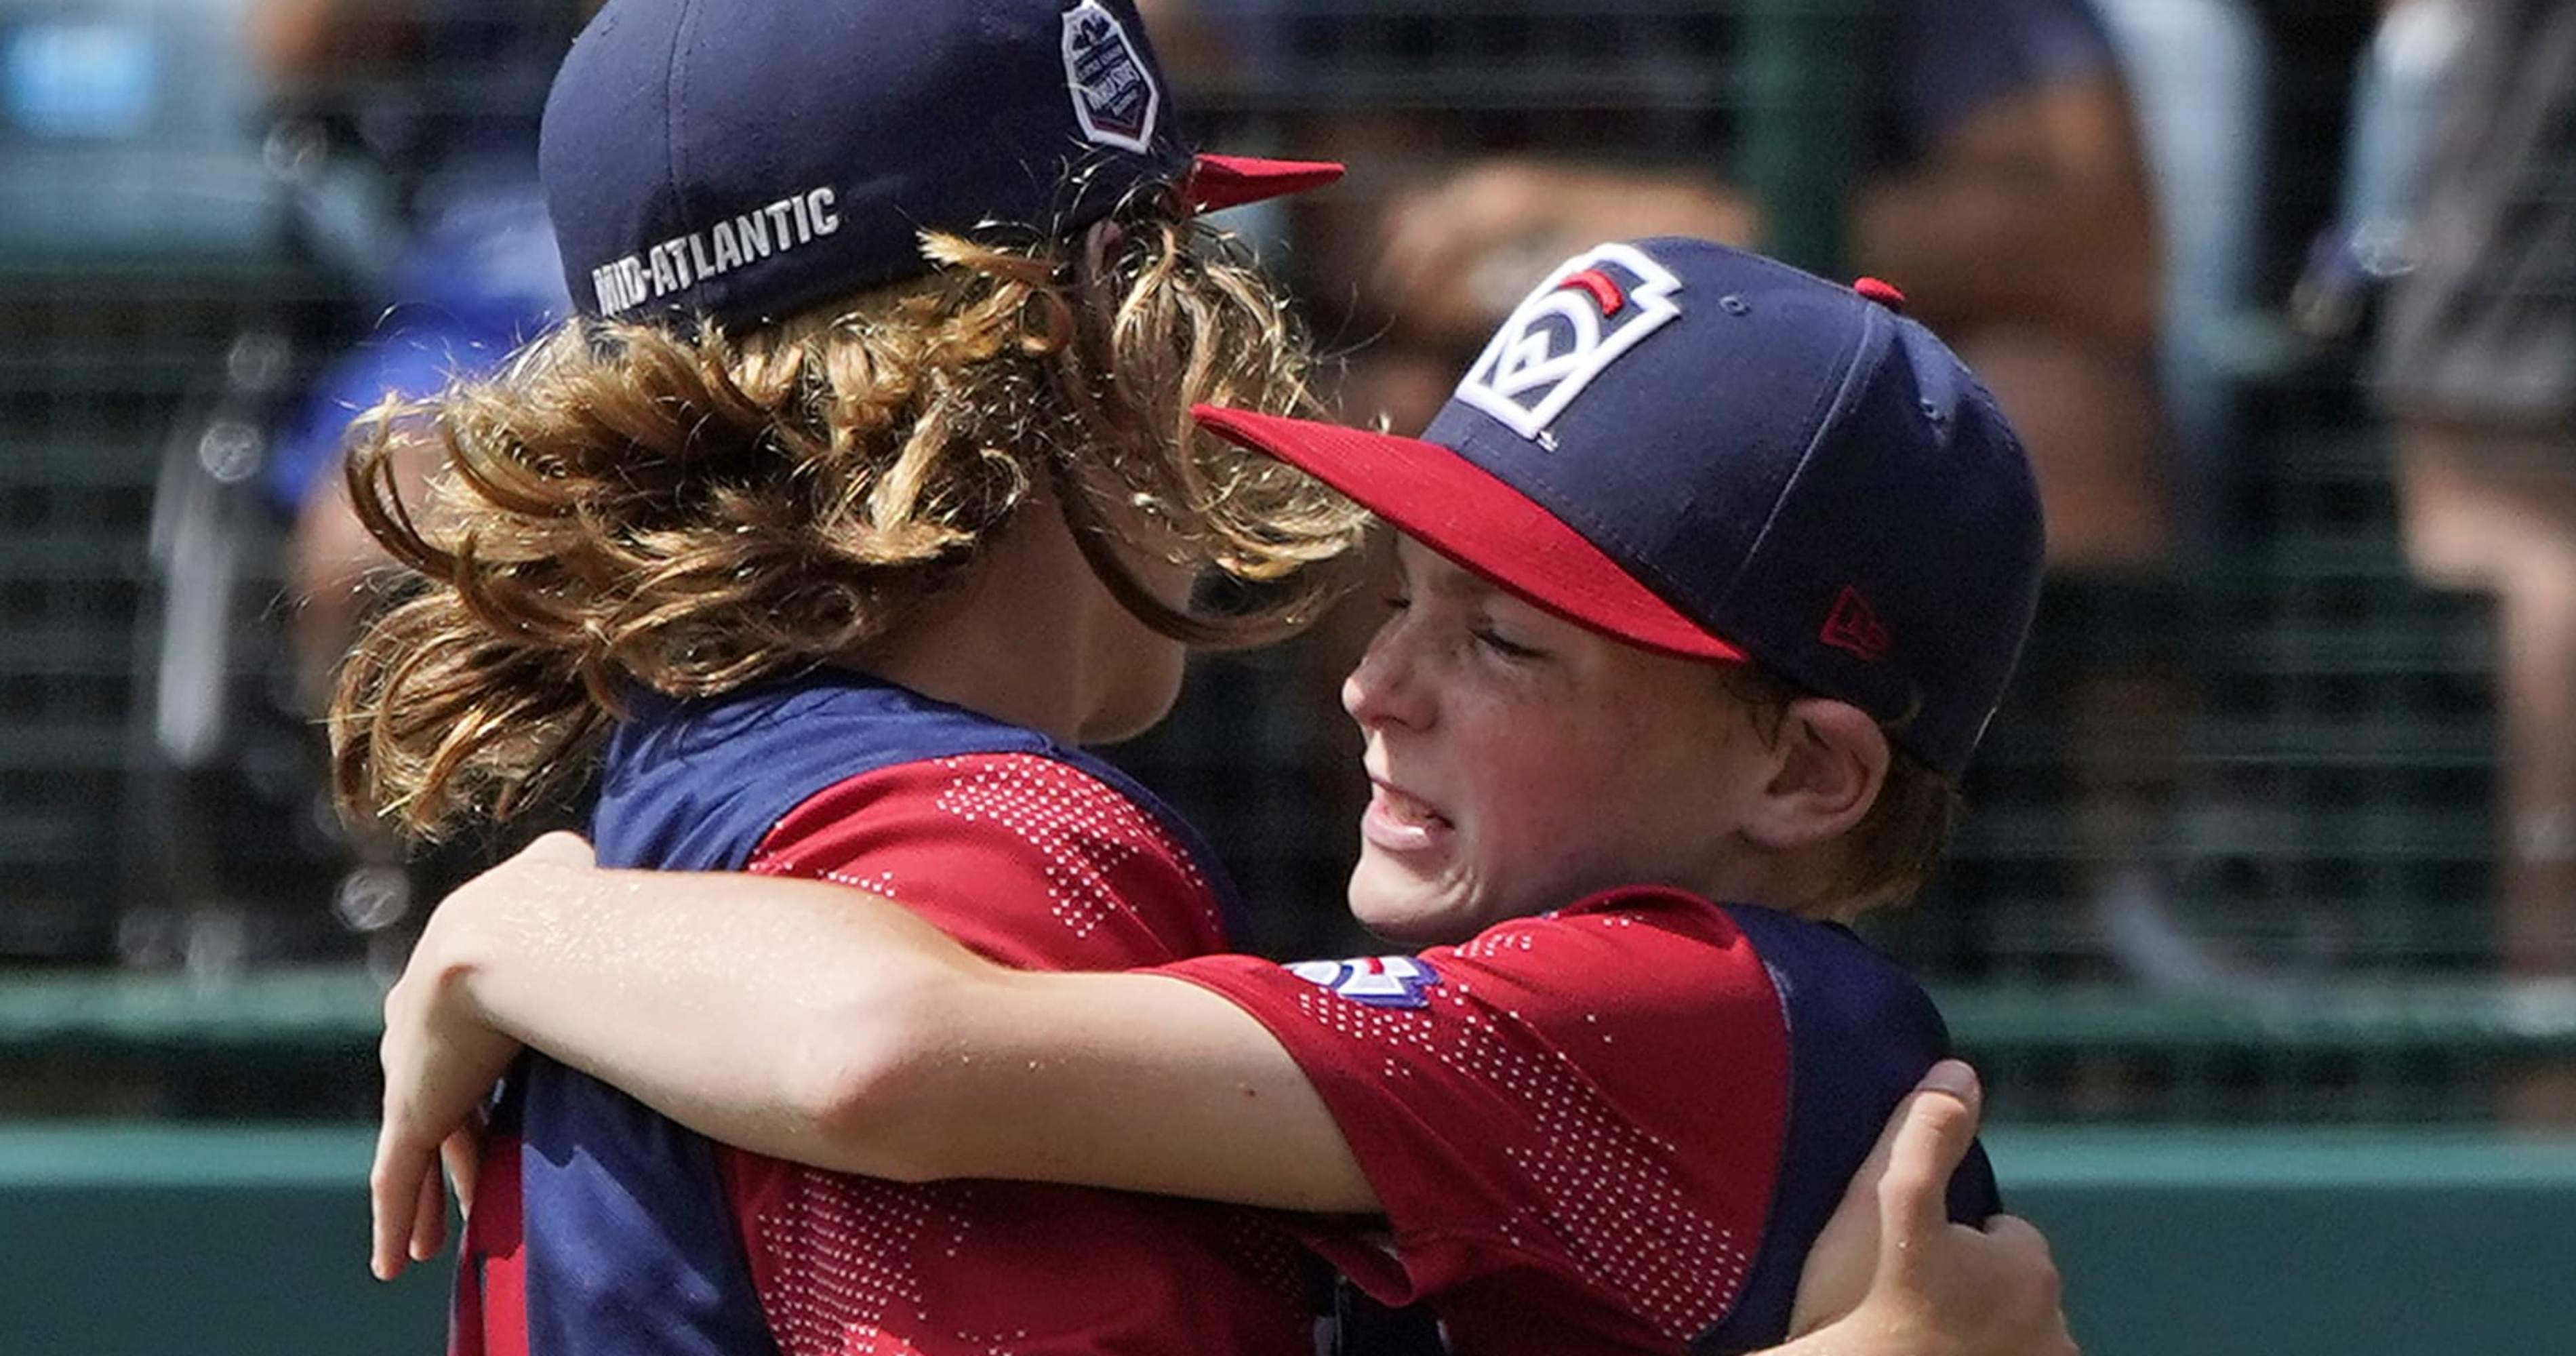 2022 Little League World Series scores, stats, history and more